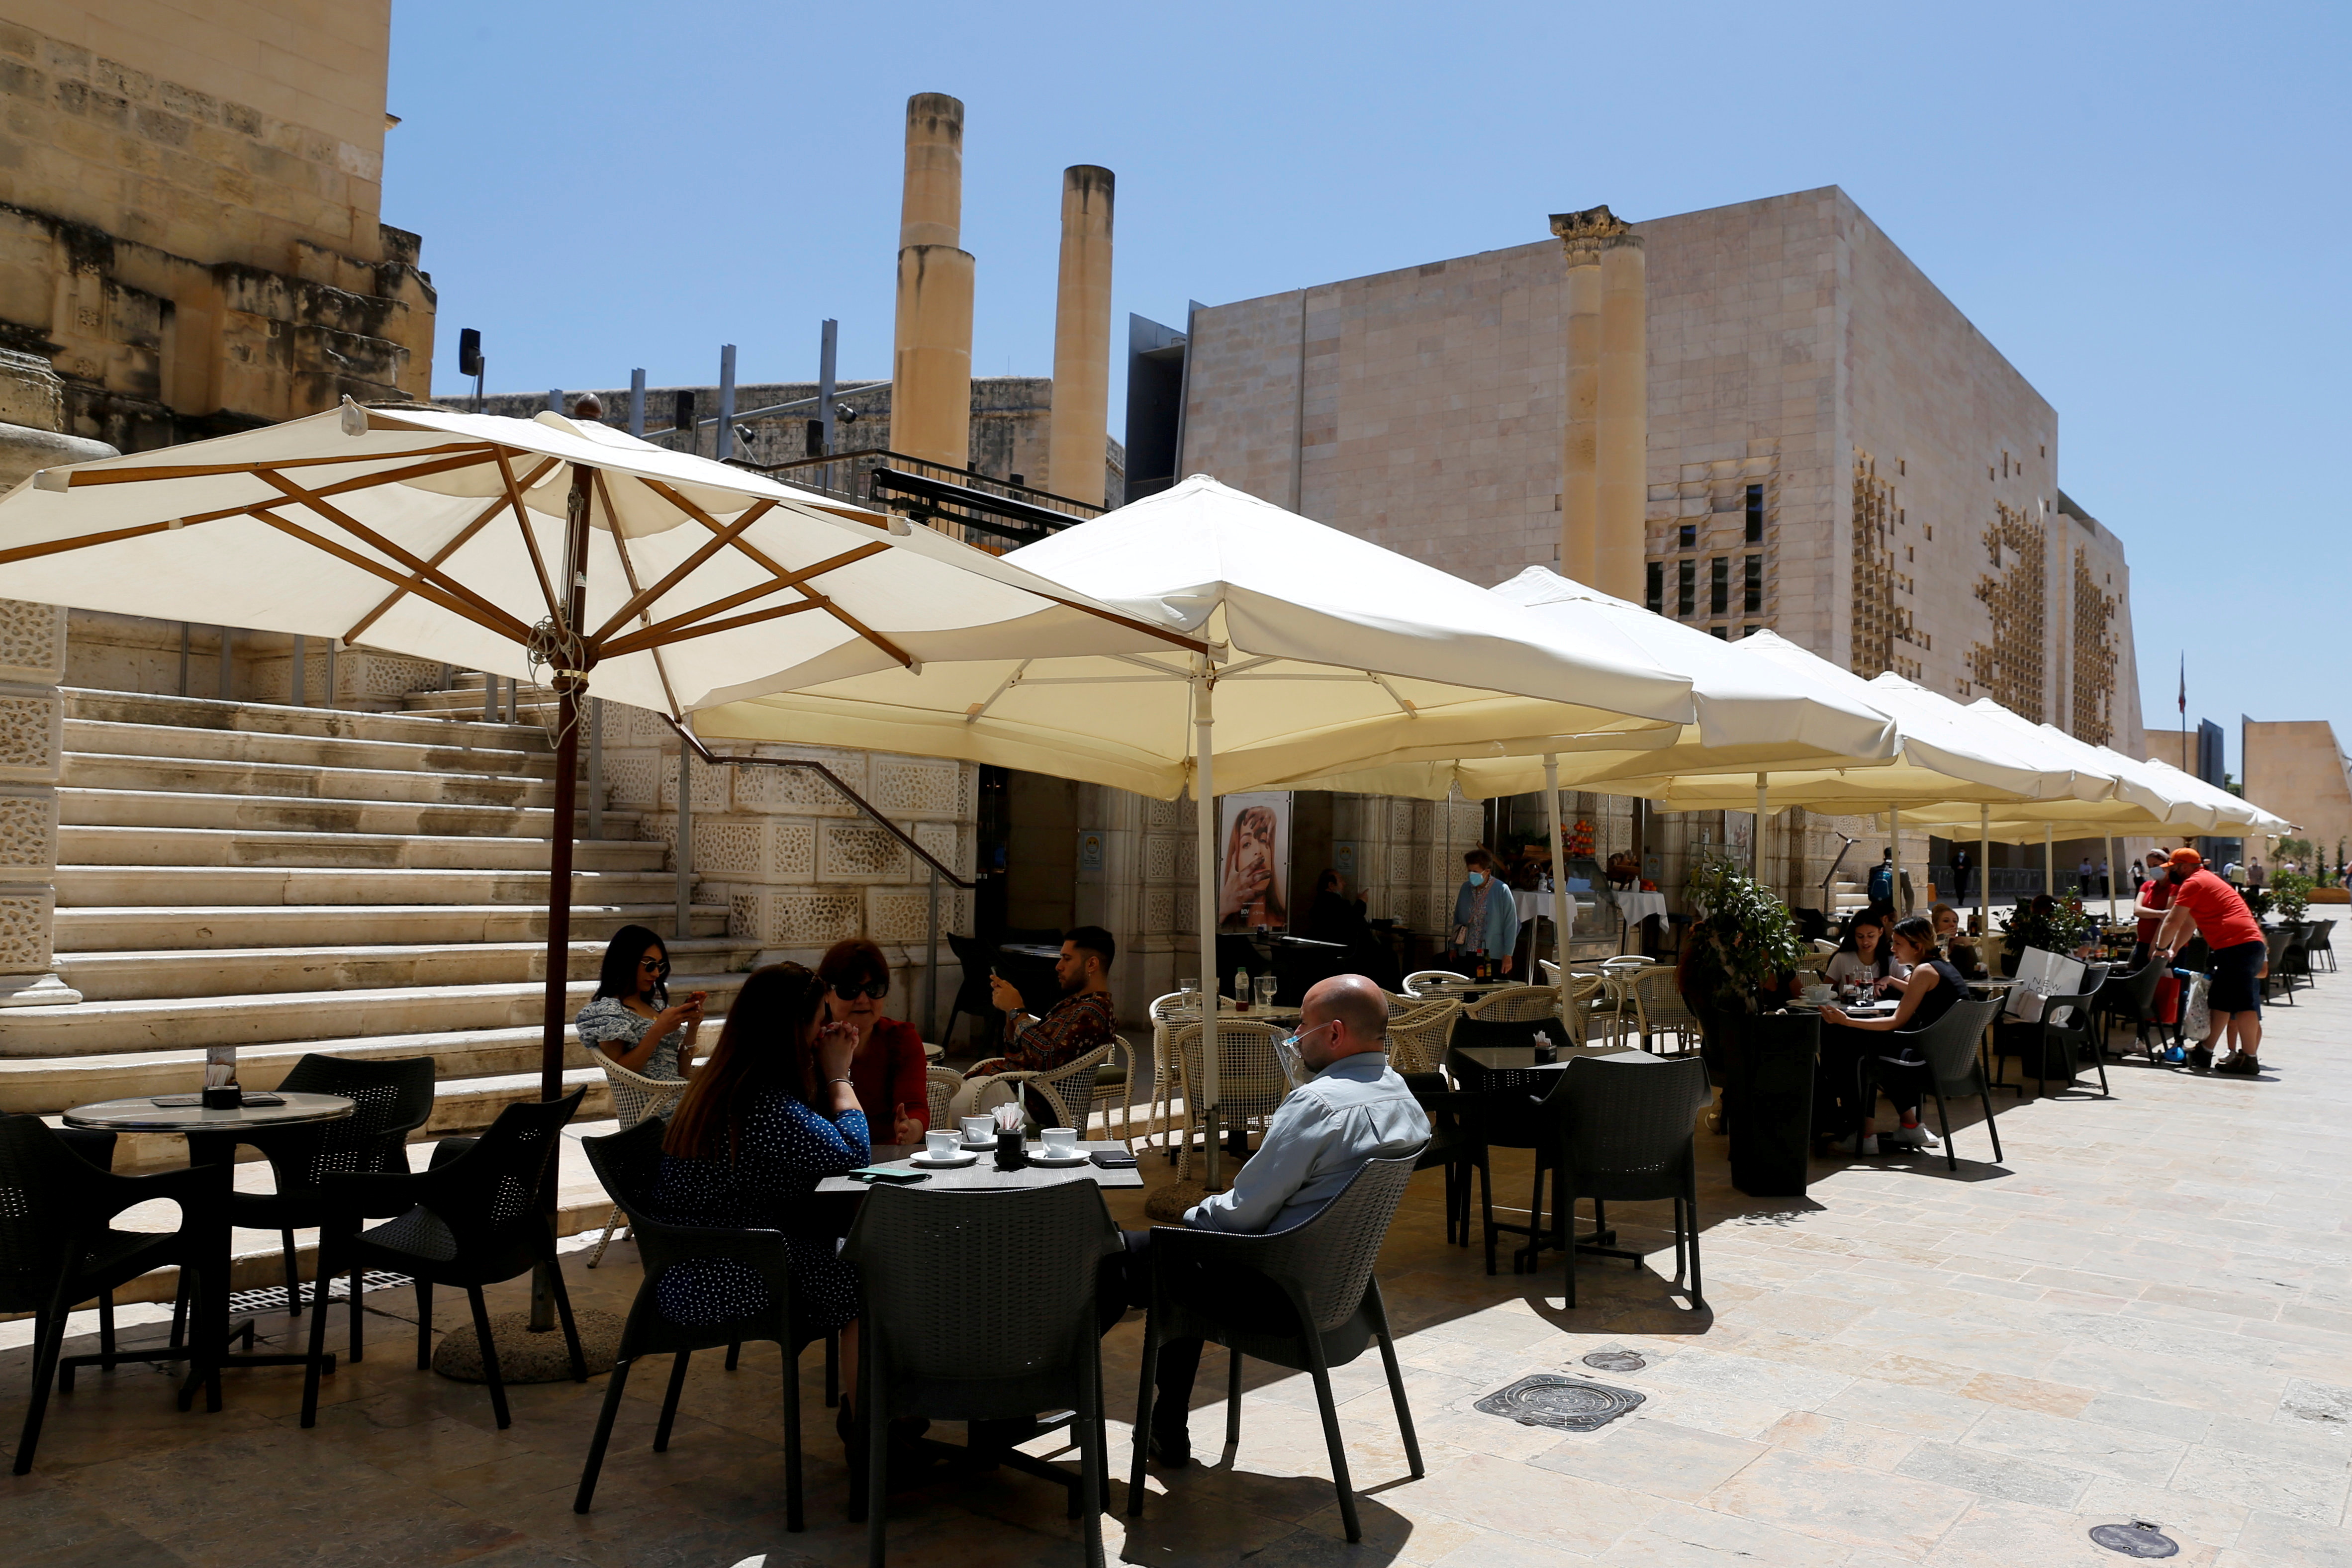 People sit at an outdoor restaurant as restaurants and markets reopened for business after coronavirus disease (COVID-19) vaccinations reached 60% of the adult population, in Valletta, Malta May 10, 2021.